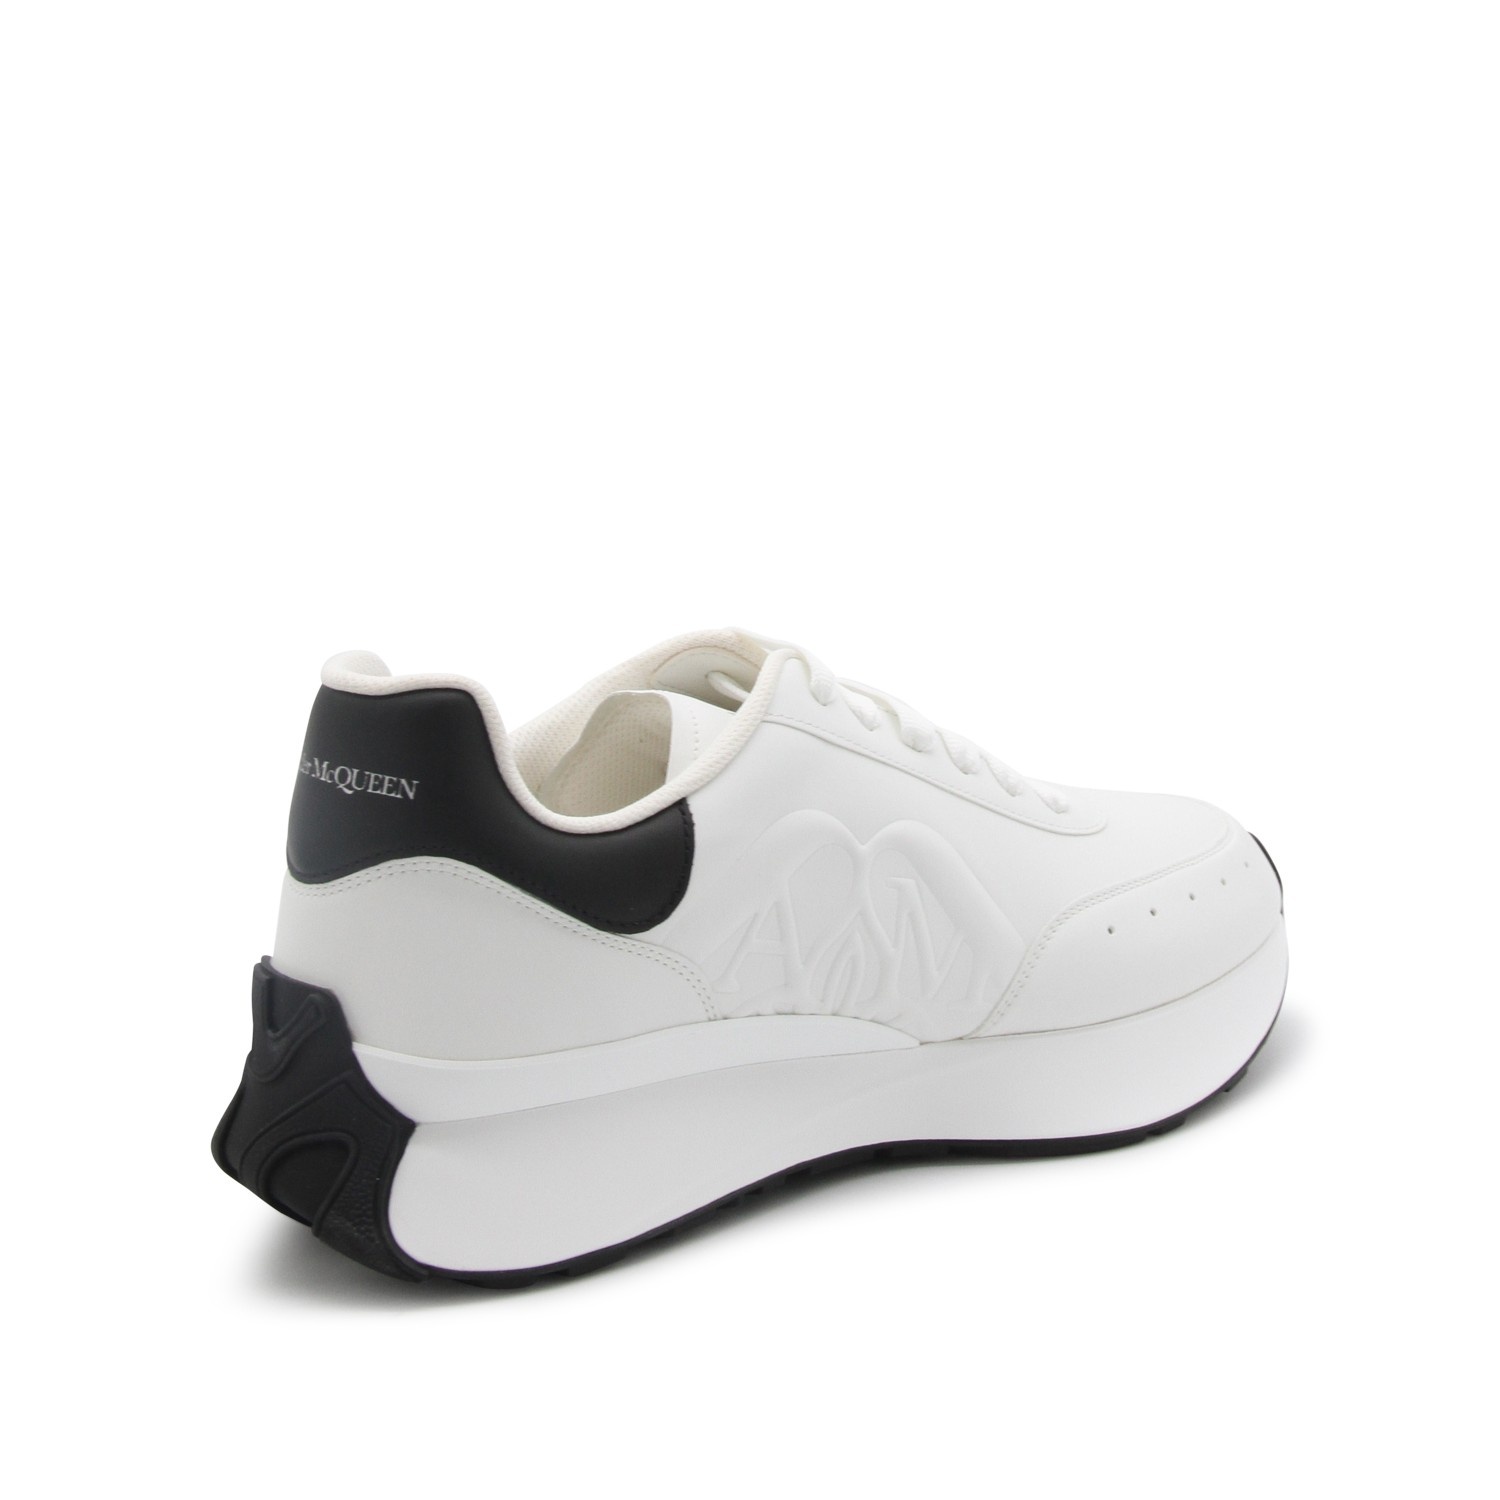 WHITE AND BLACK LEATHER SPRINT SNEAKERS - 3